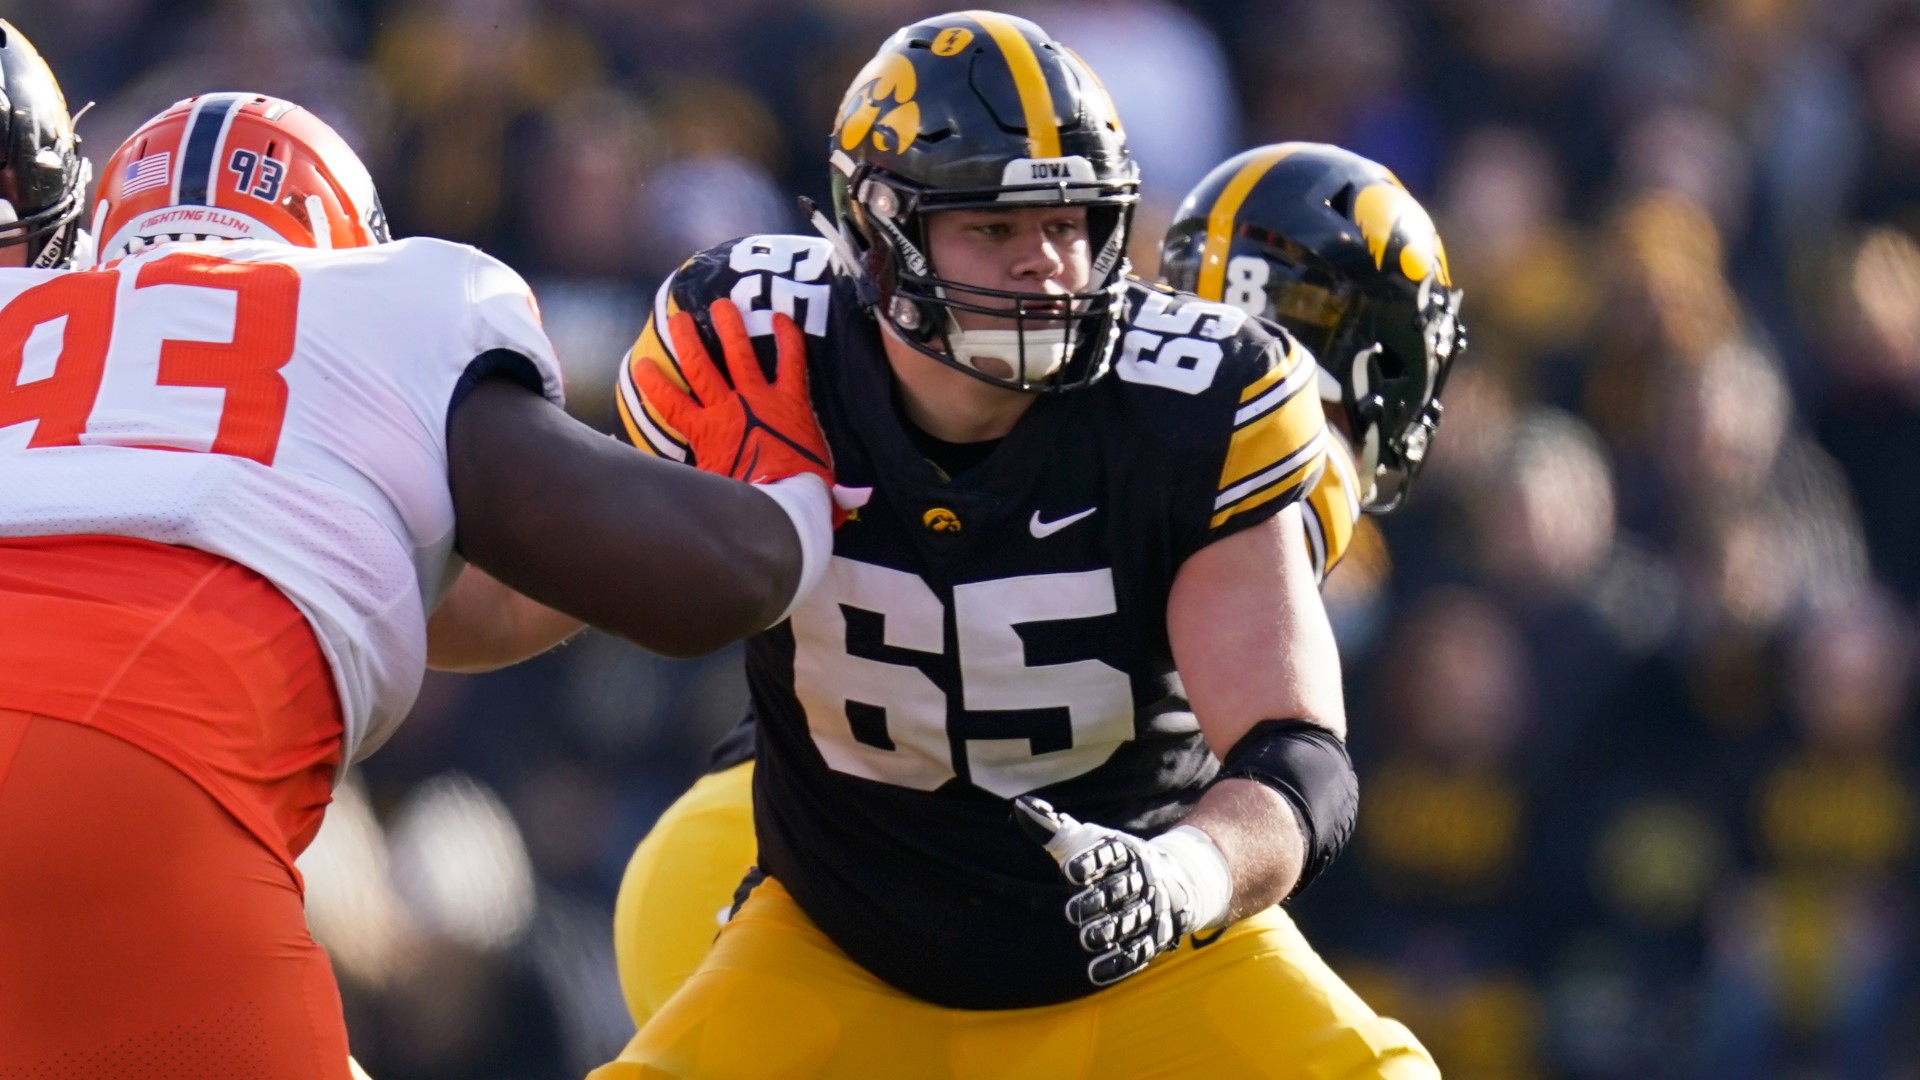 Iowa center Tyler Linderbaum selected in 1st round by Ravens